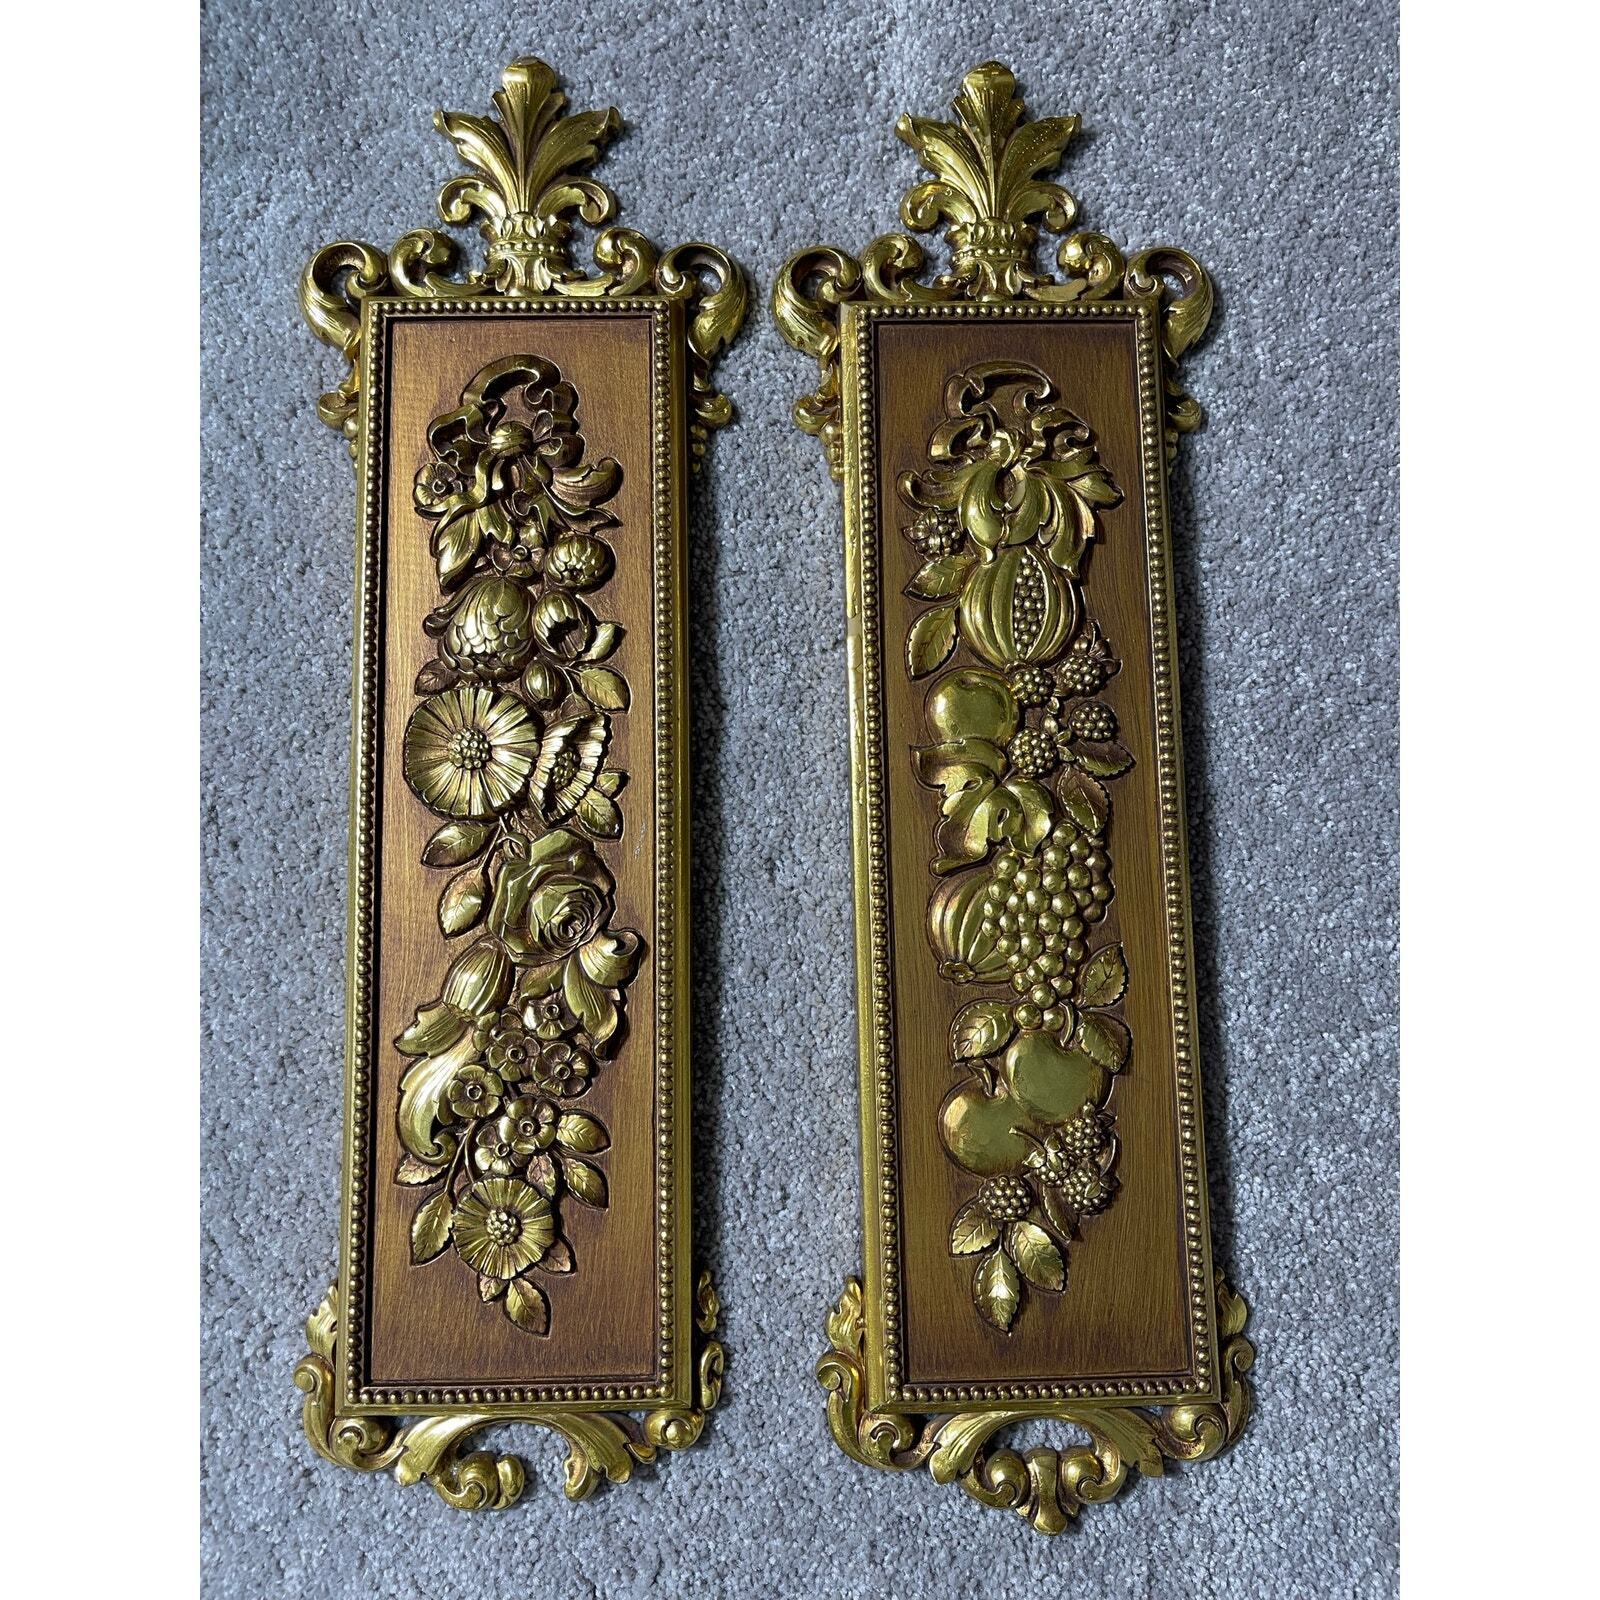 Vintage Syroco Floral Wall Plaques Set of 2 7222 Fruits & Florals Gold